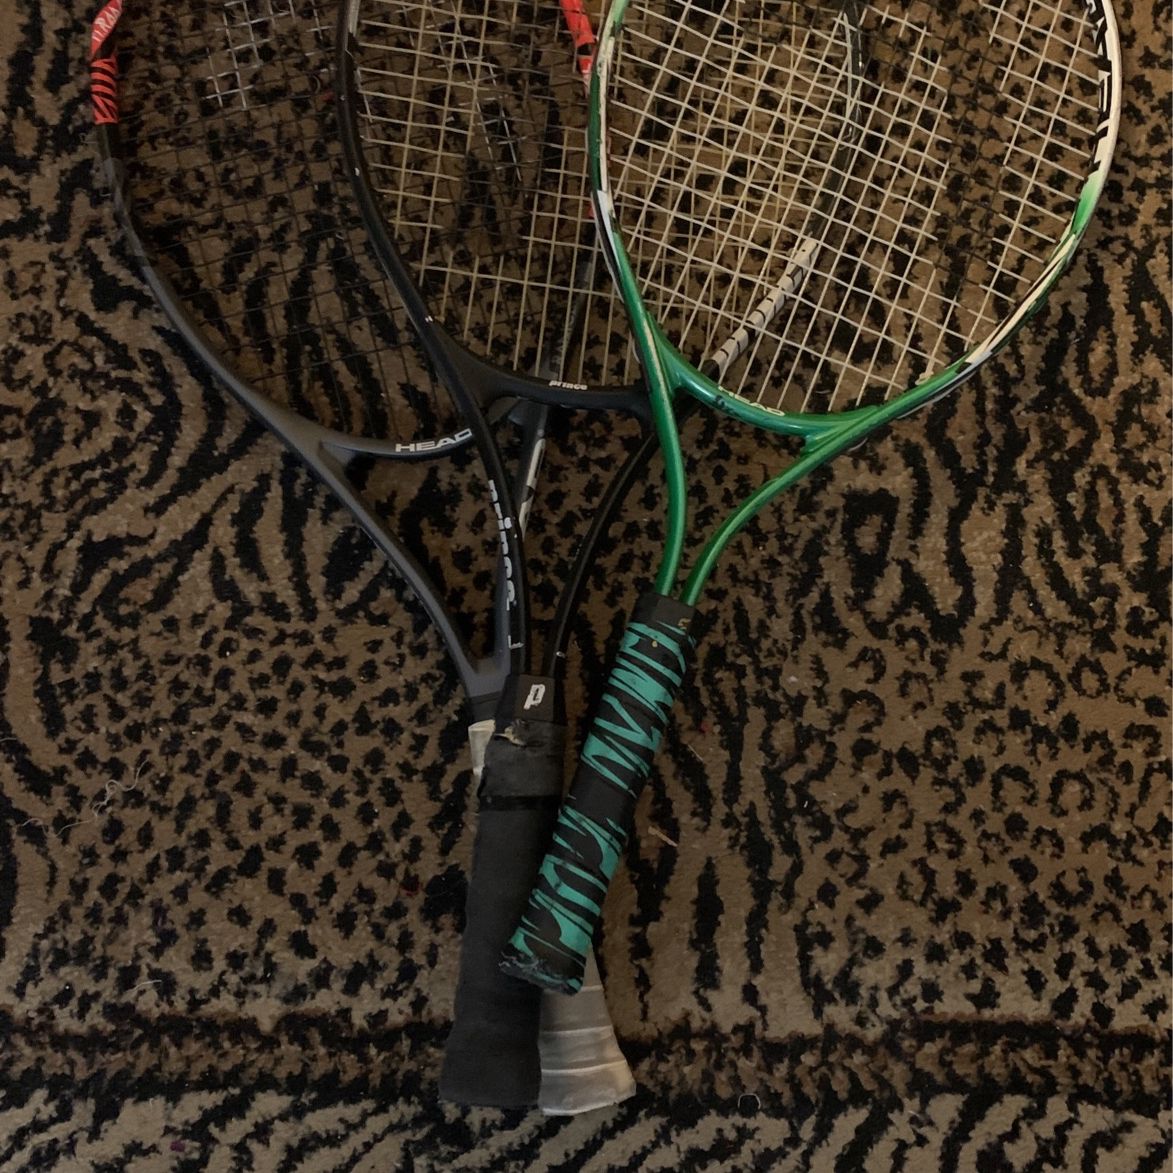 3 Used Tennis Rackets (2 Head, 1 Prince) (potential concerns can be seen in photos)